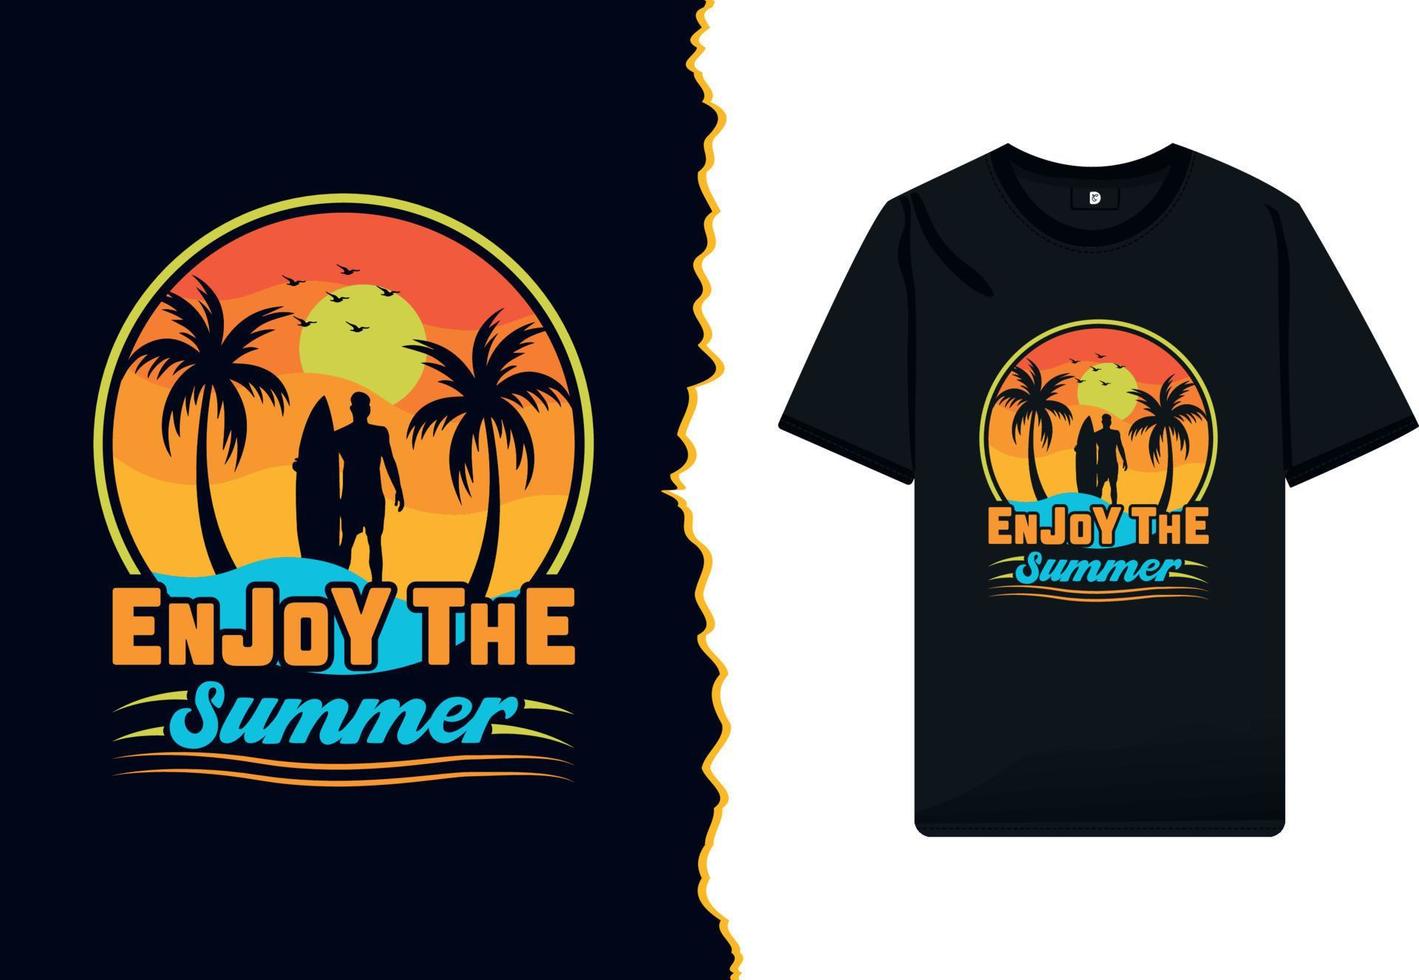 Summer t-shirt design vector illustration of a enjoy beach party with palm trees and retro color typography vacation vintage colorful shirt template.